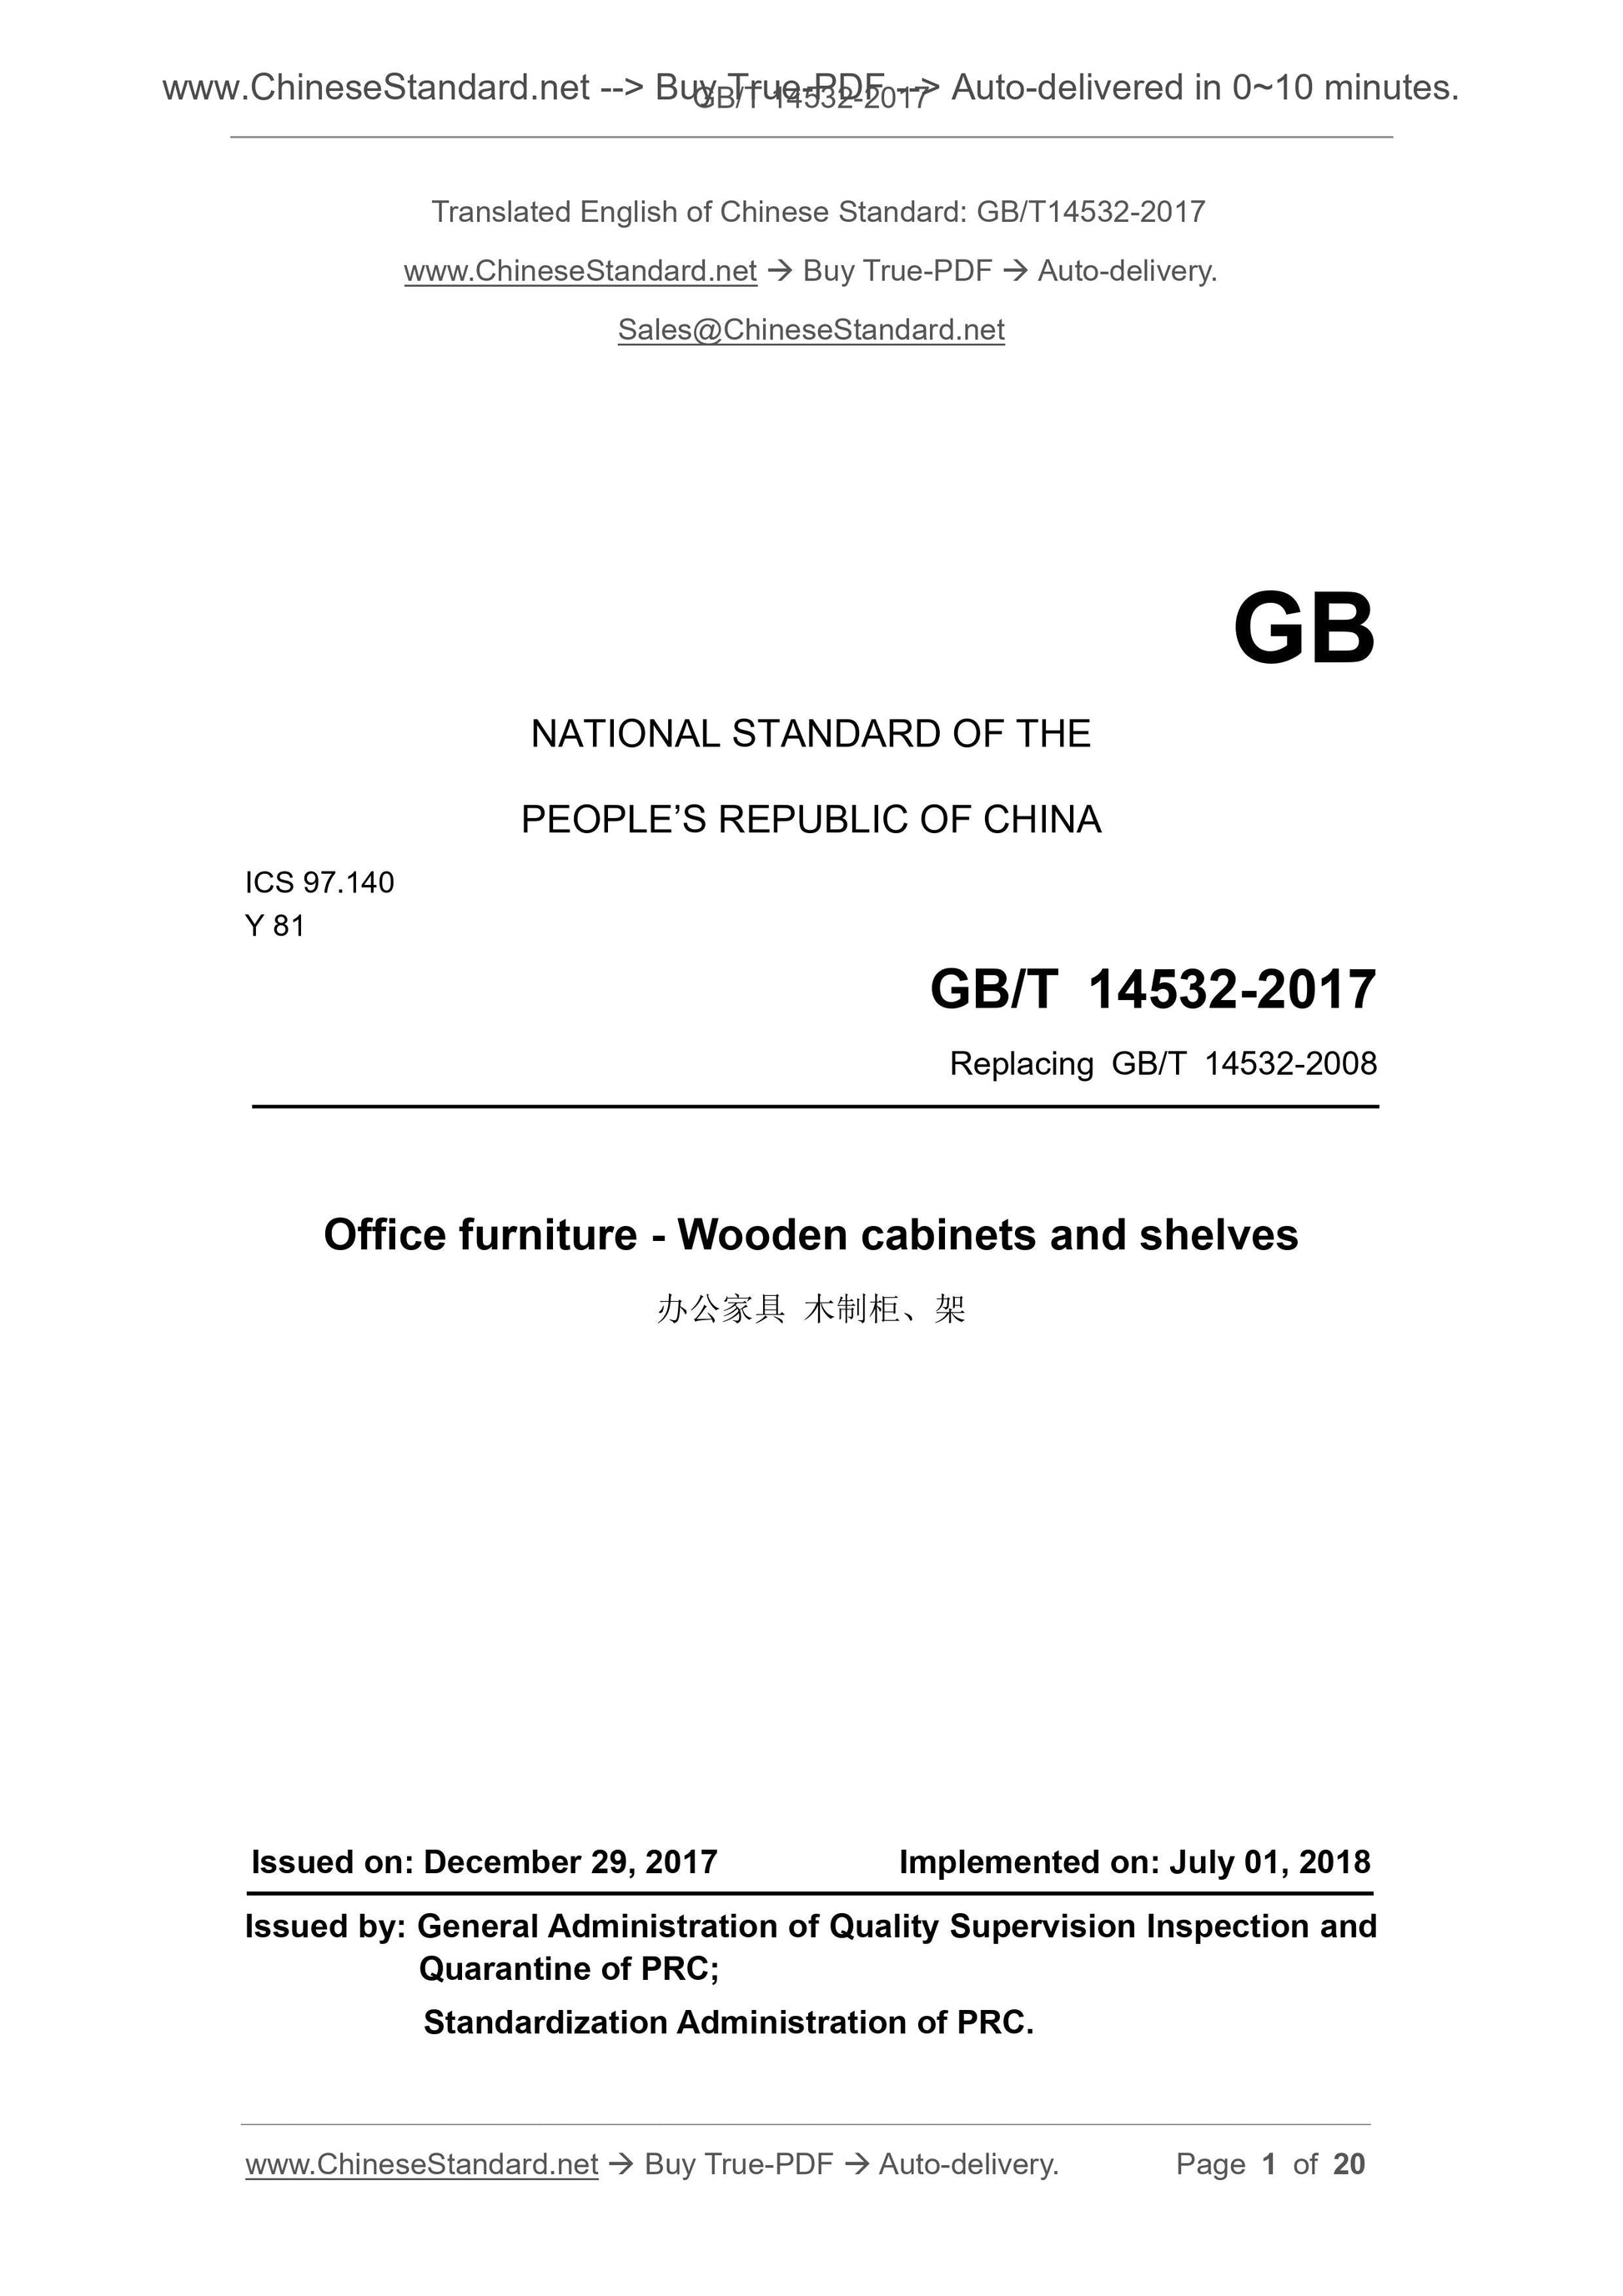 GB/T 14532-2017 Page 1